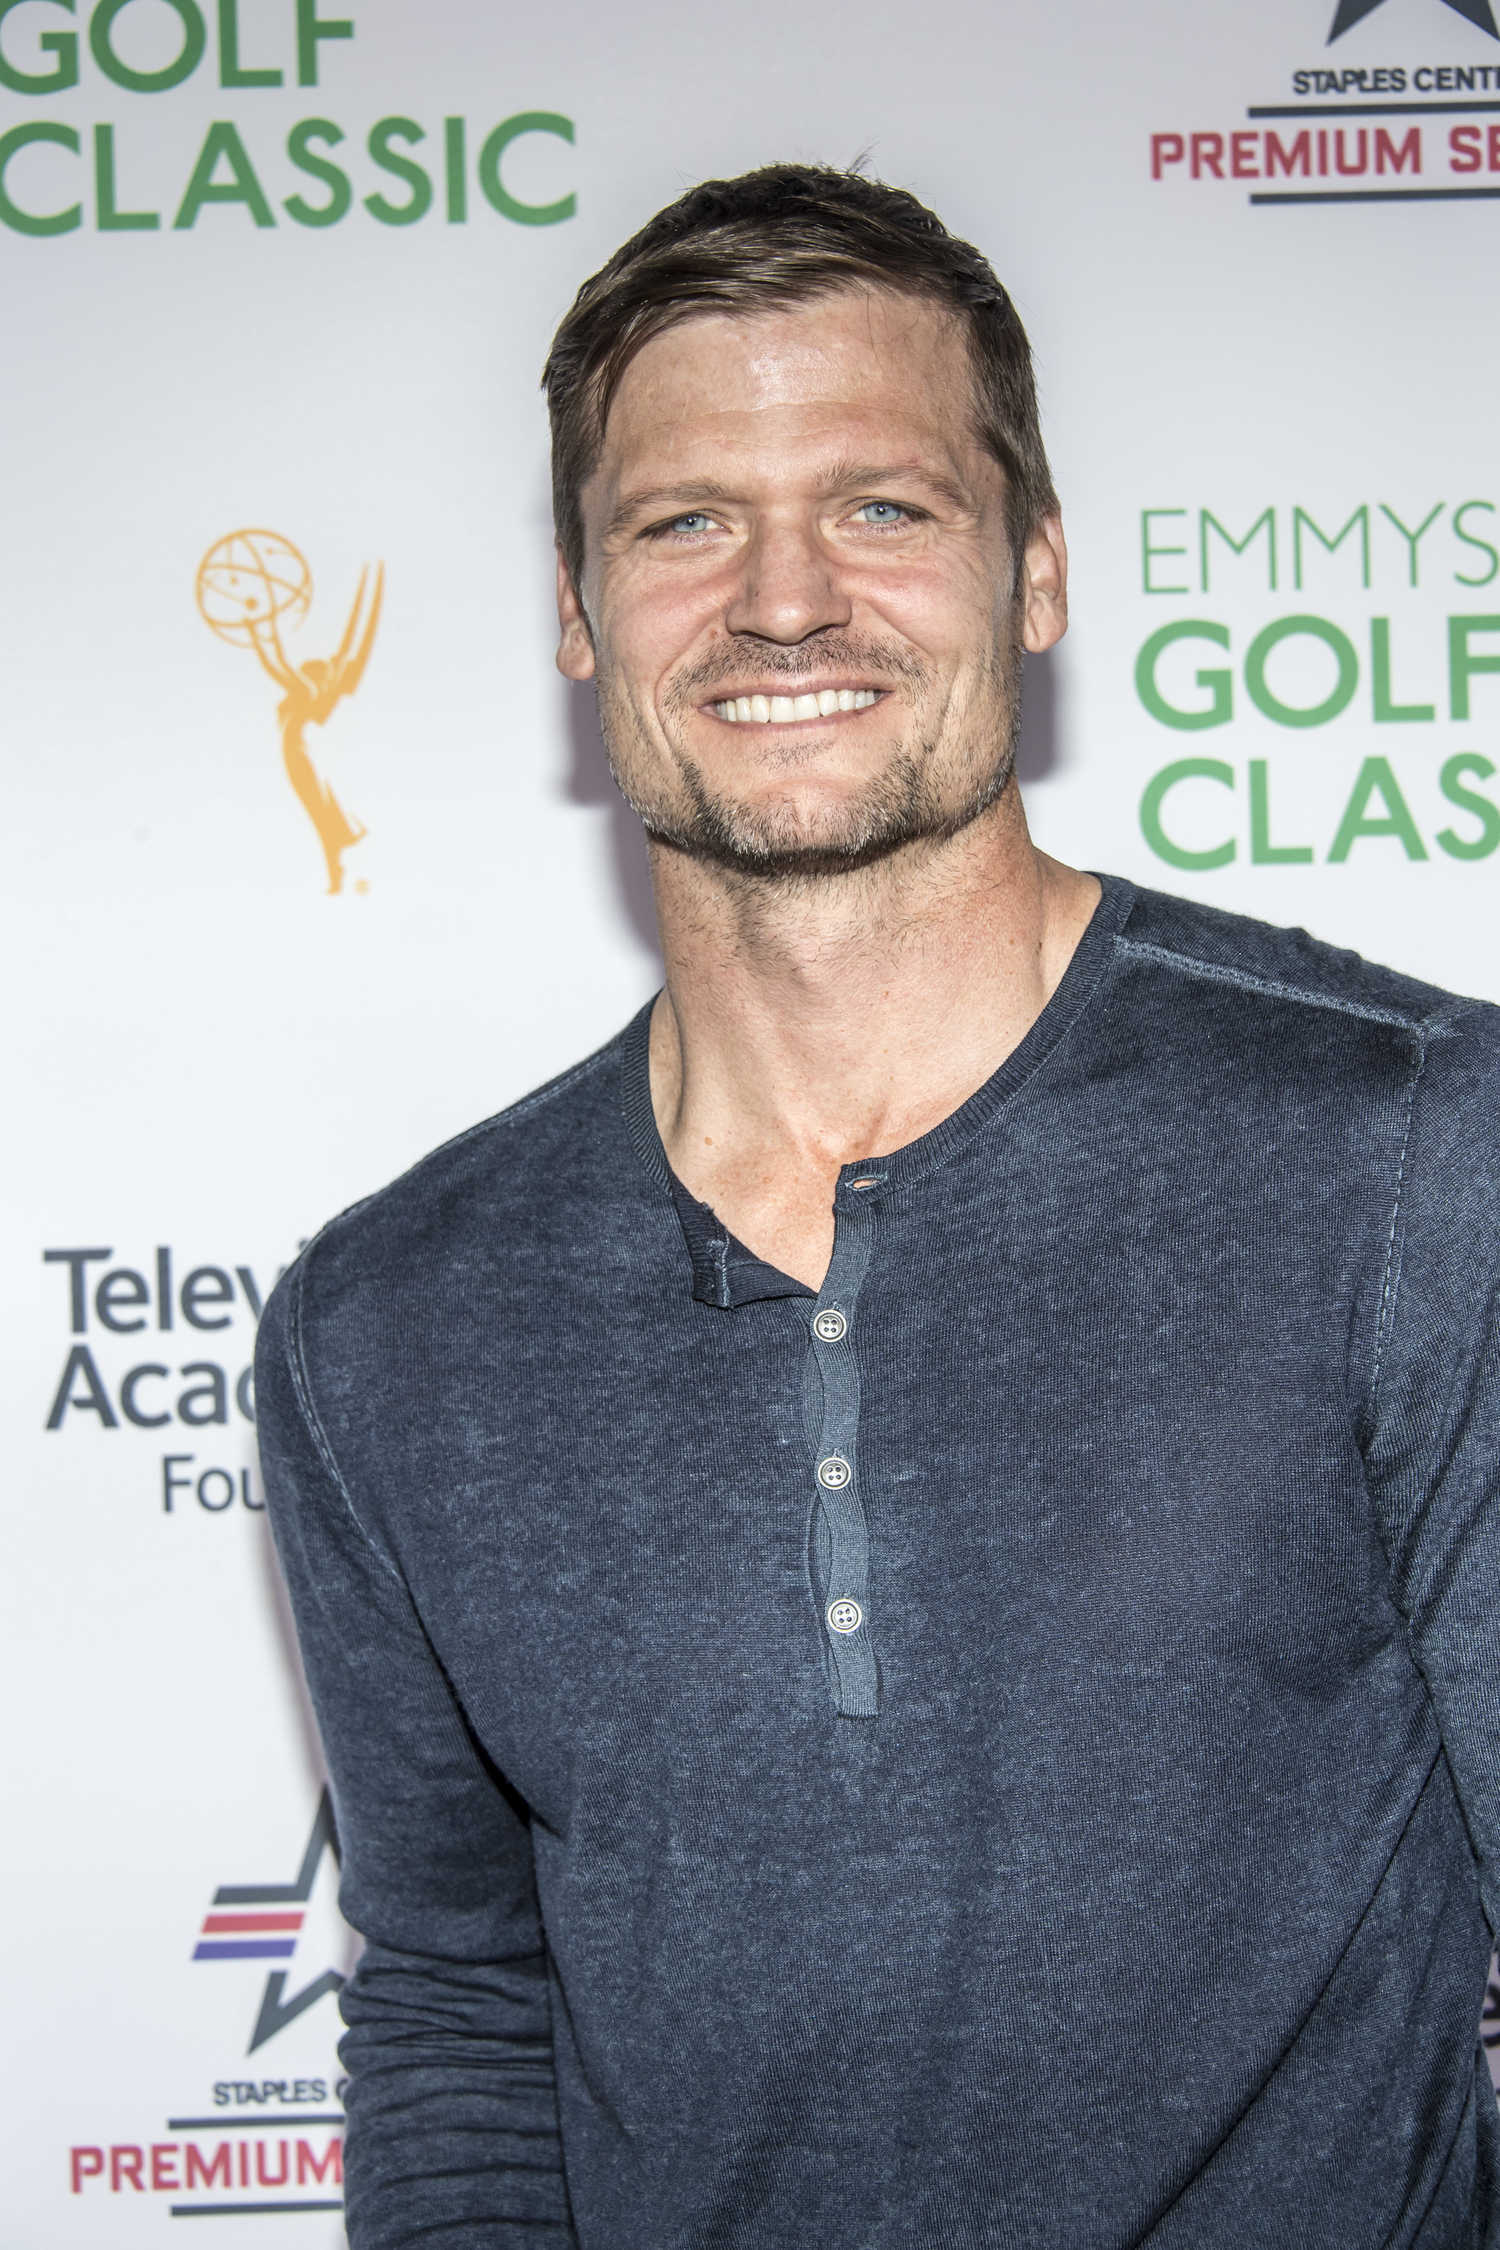 Bailey Chase at the 18th Annual Emmys Golf Classic in Los Angeles